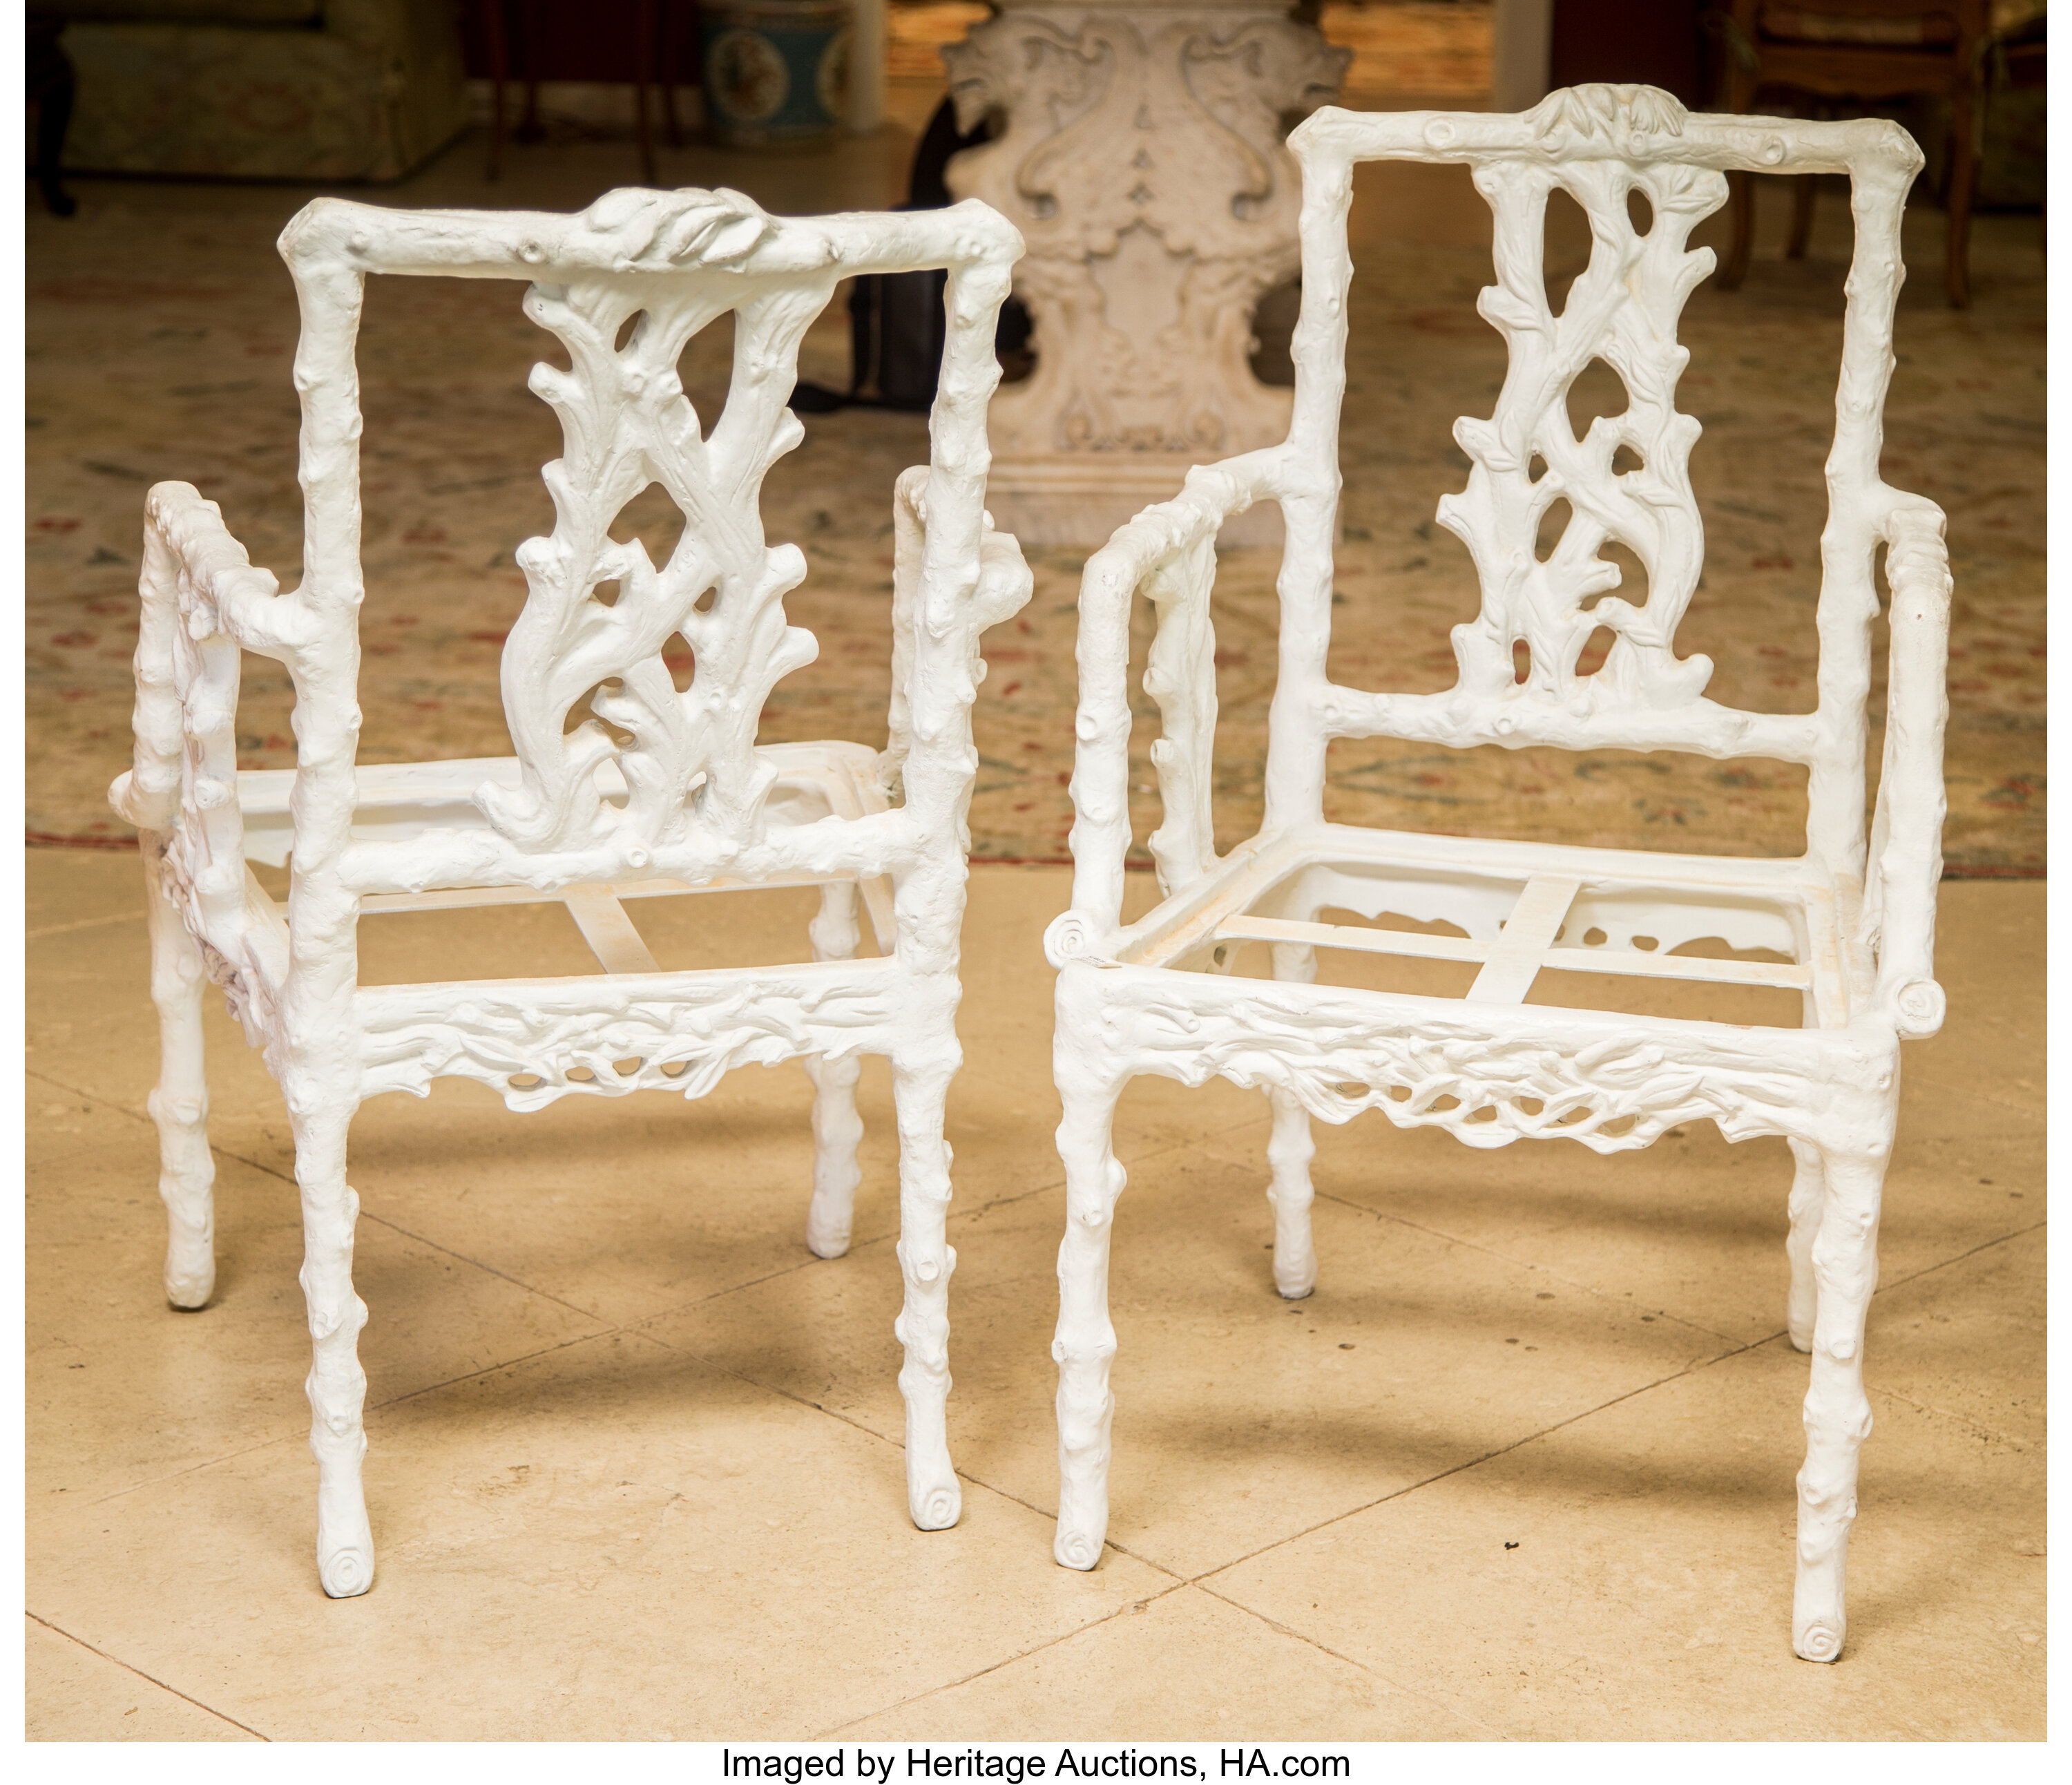 Five Faux Bois Cast Resin Garden Chairs After An Aesthetic Design